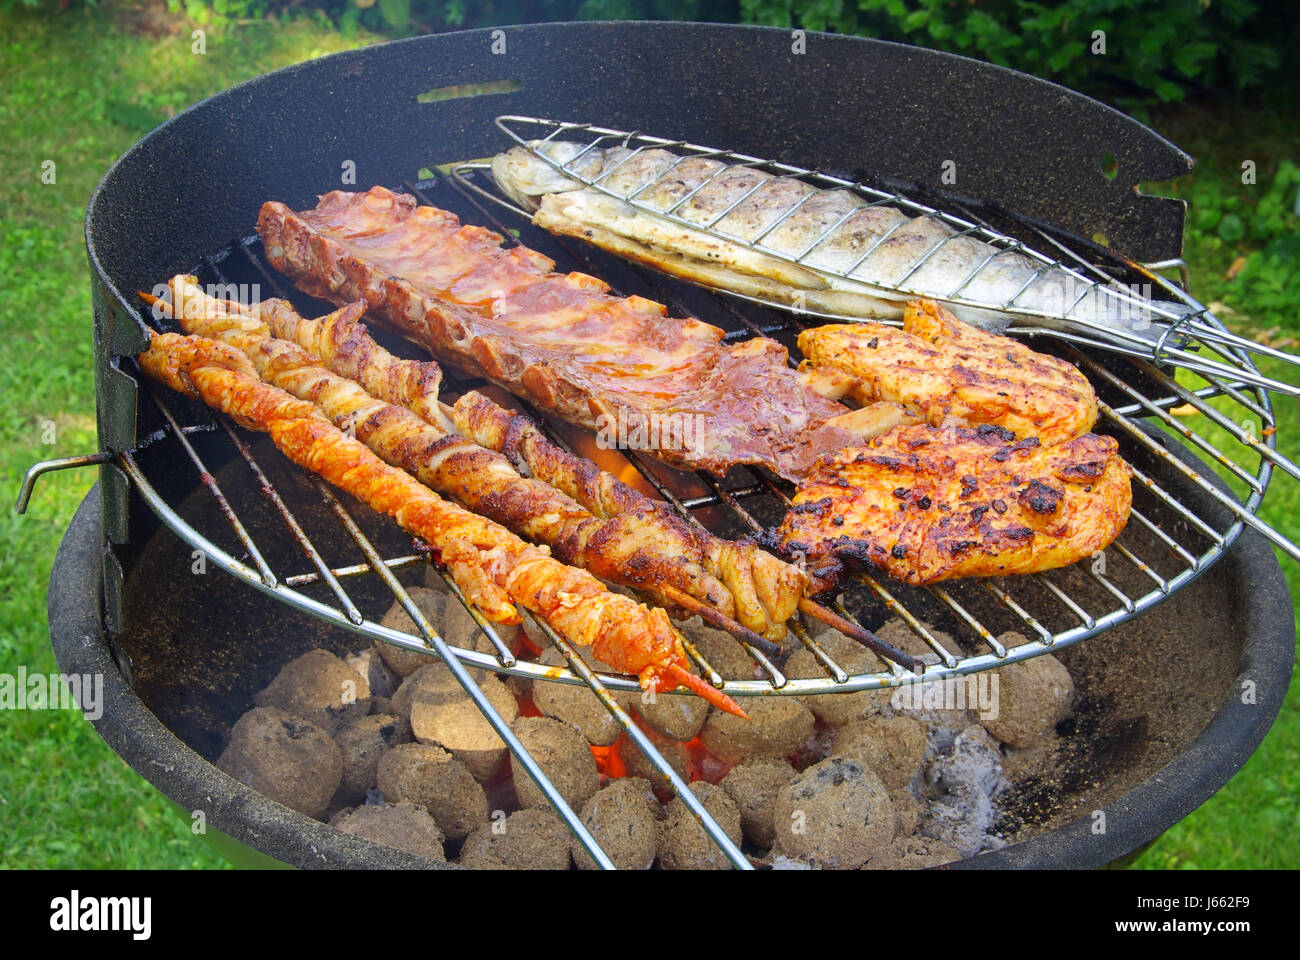 fish trout grill barbecue barbeque meat food aliment fish boil cooks boiling Stock Photo